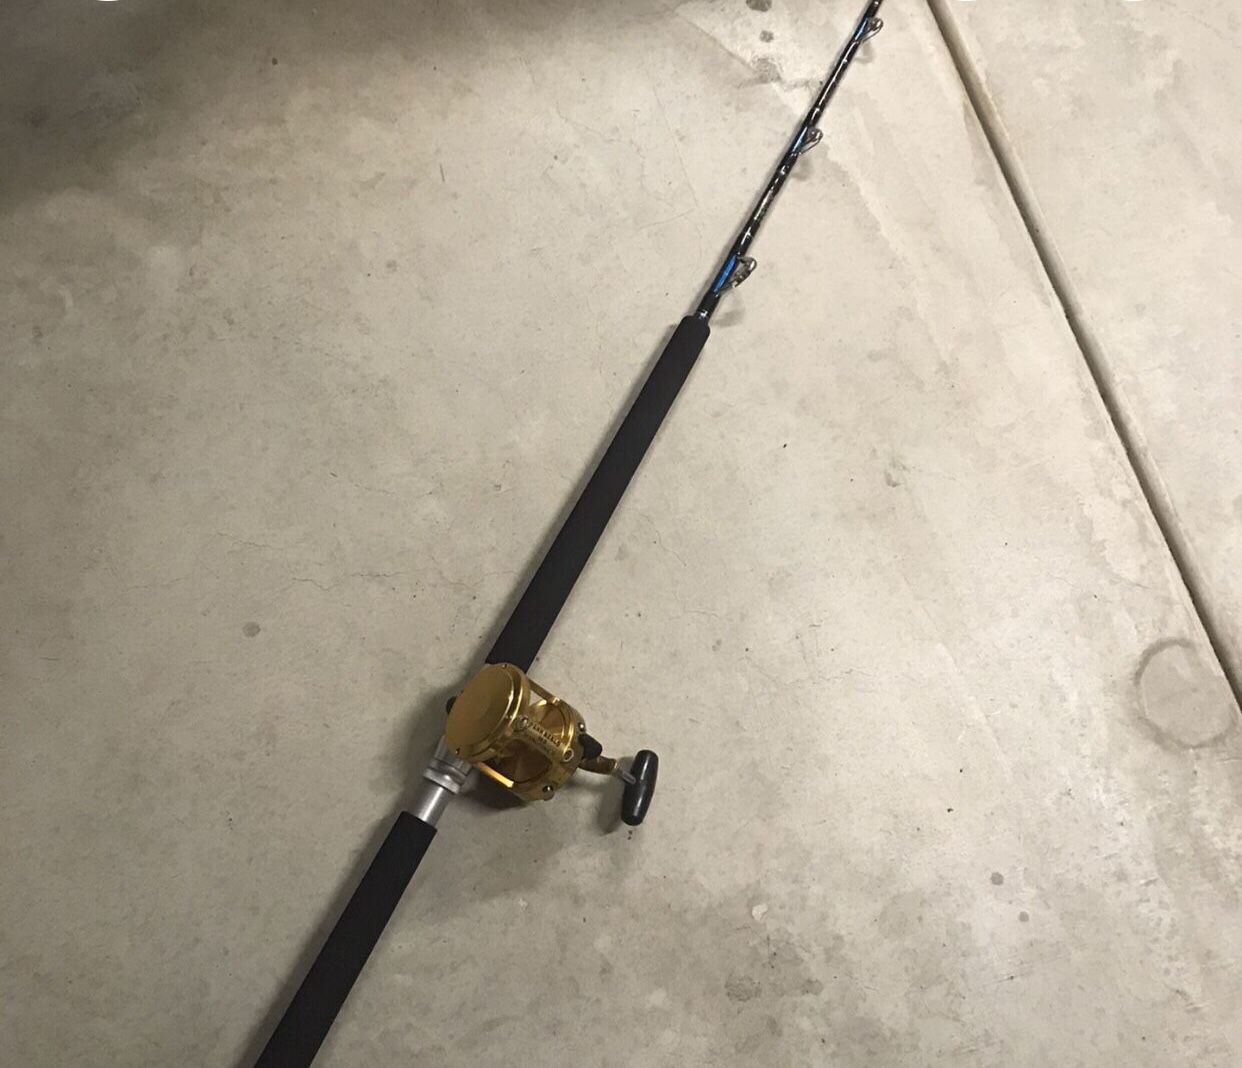 Trolling Fishing Pole “Seeker” = Trolling Rod With Rollers 6’ Rated 60-100lbs